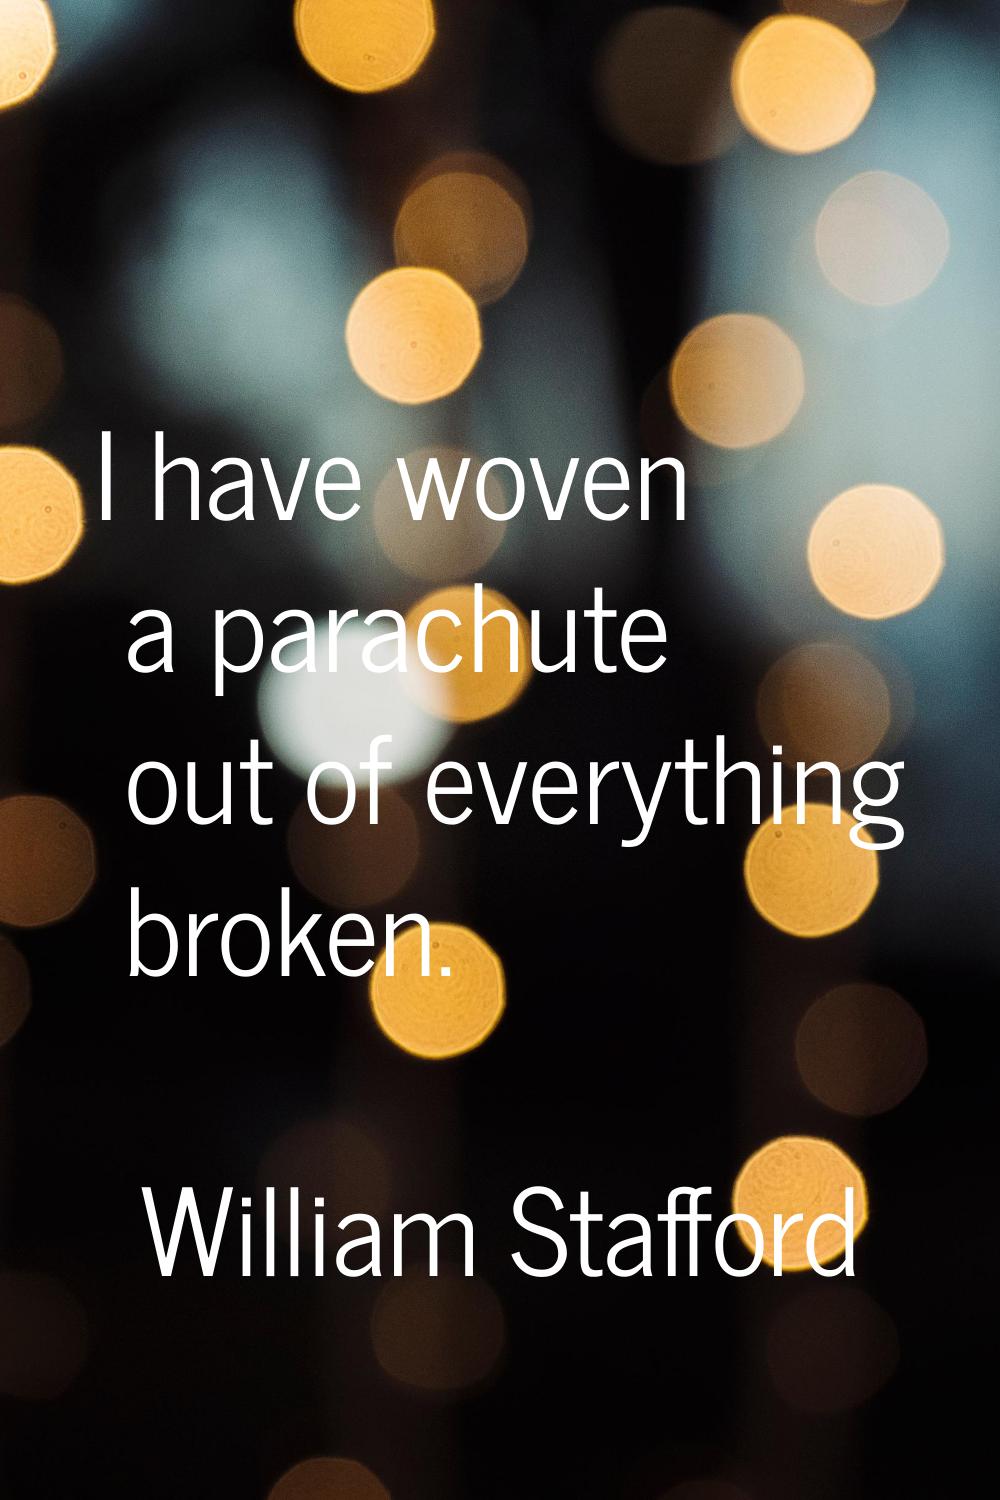 I have woven a parachute out of everything broken.